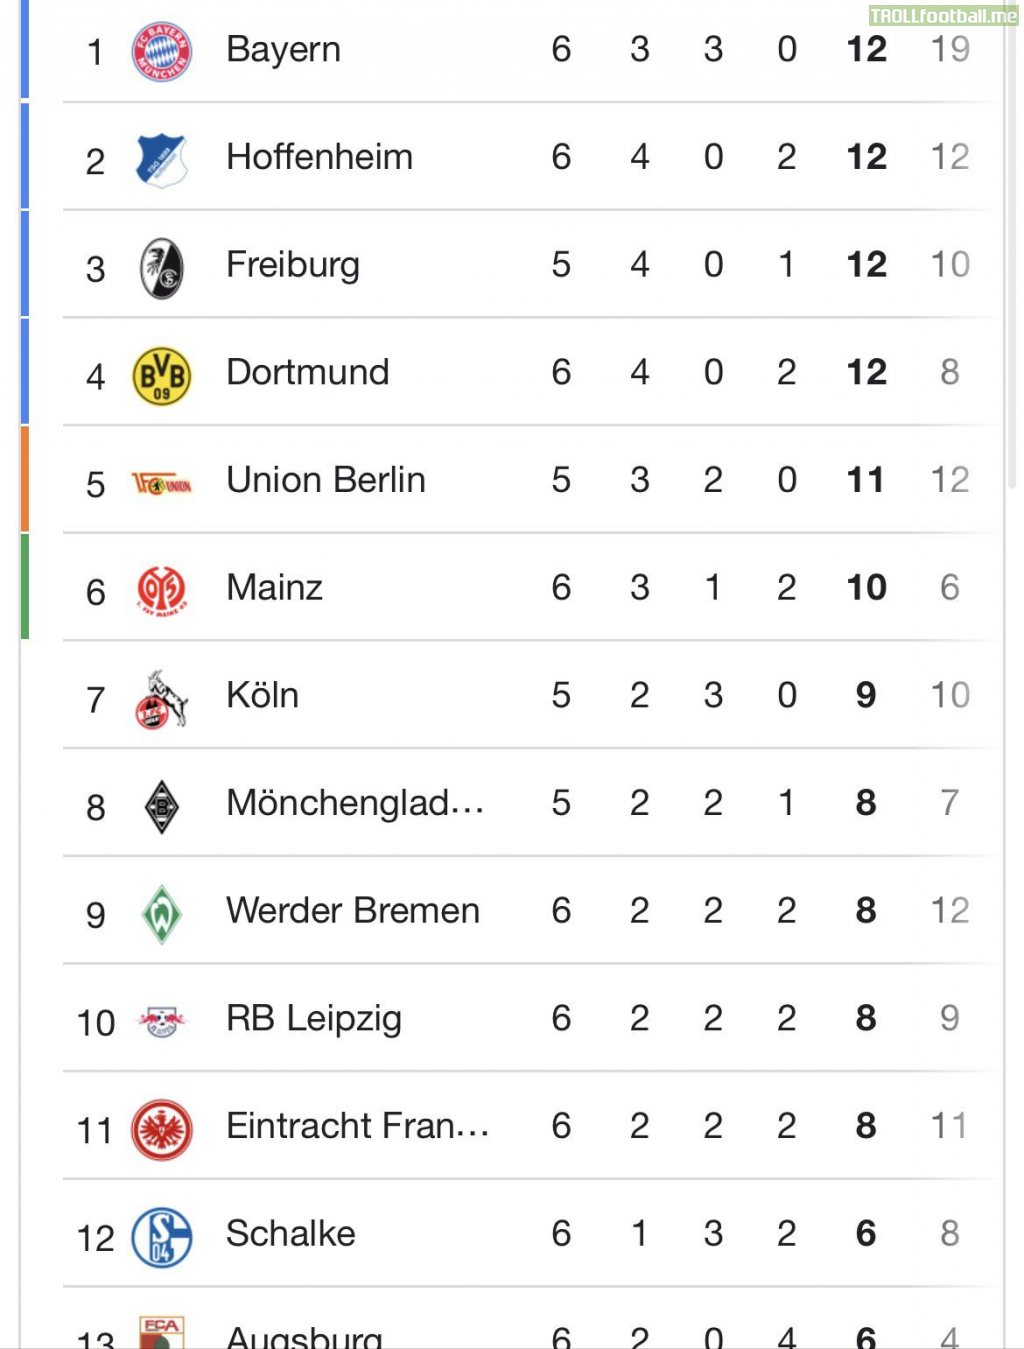 Bayern has the worst season start in 12 years and still leads the table